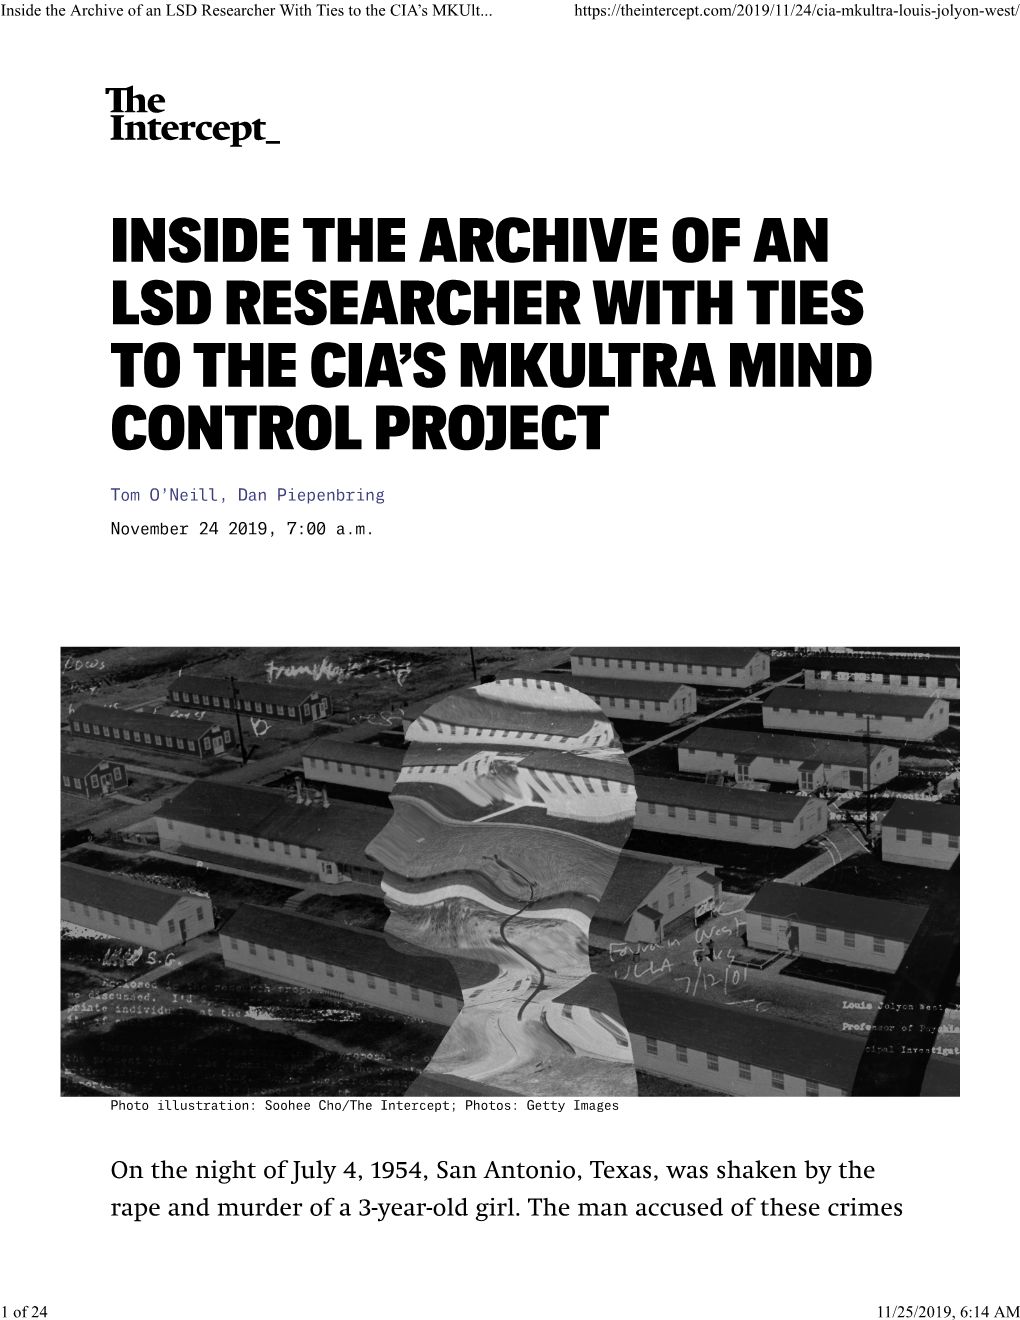 Inside the Archive of an Lsd Researcher with Ties to the Cia's Mkultra Mind